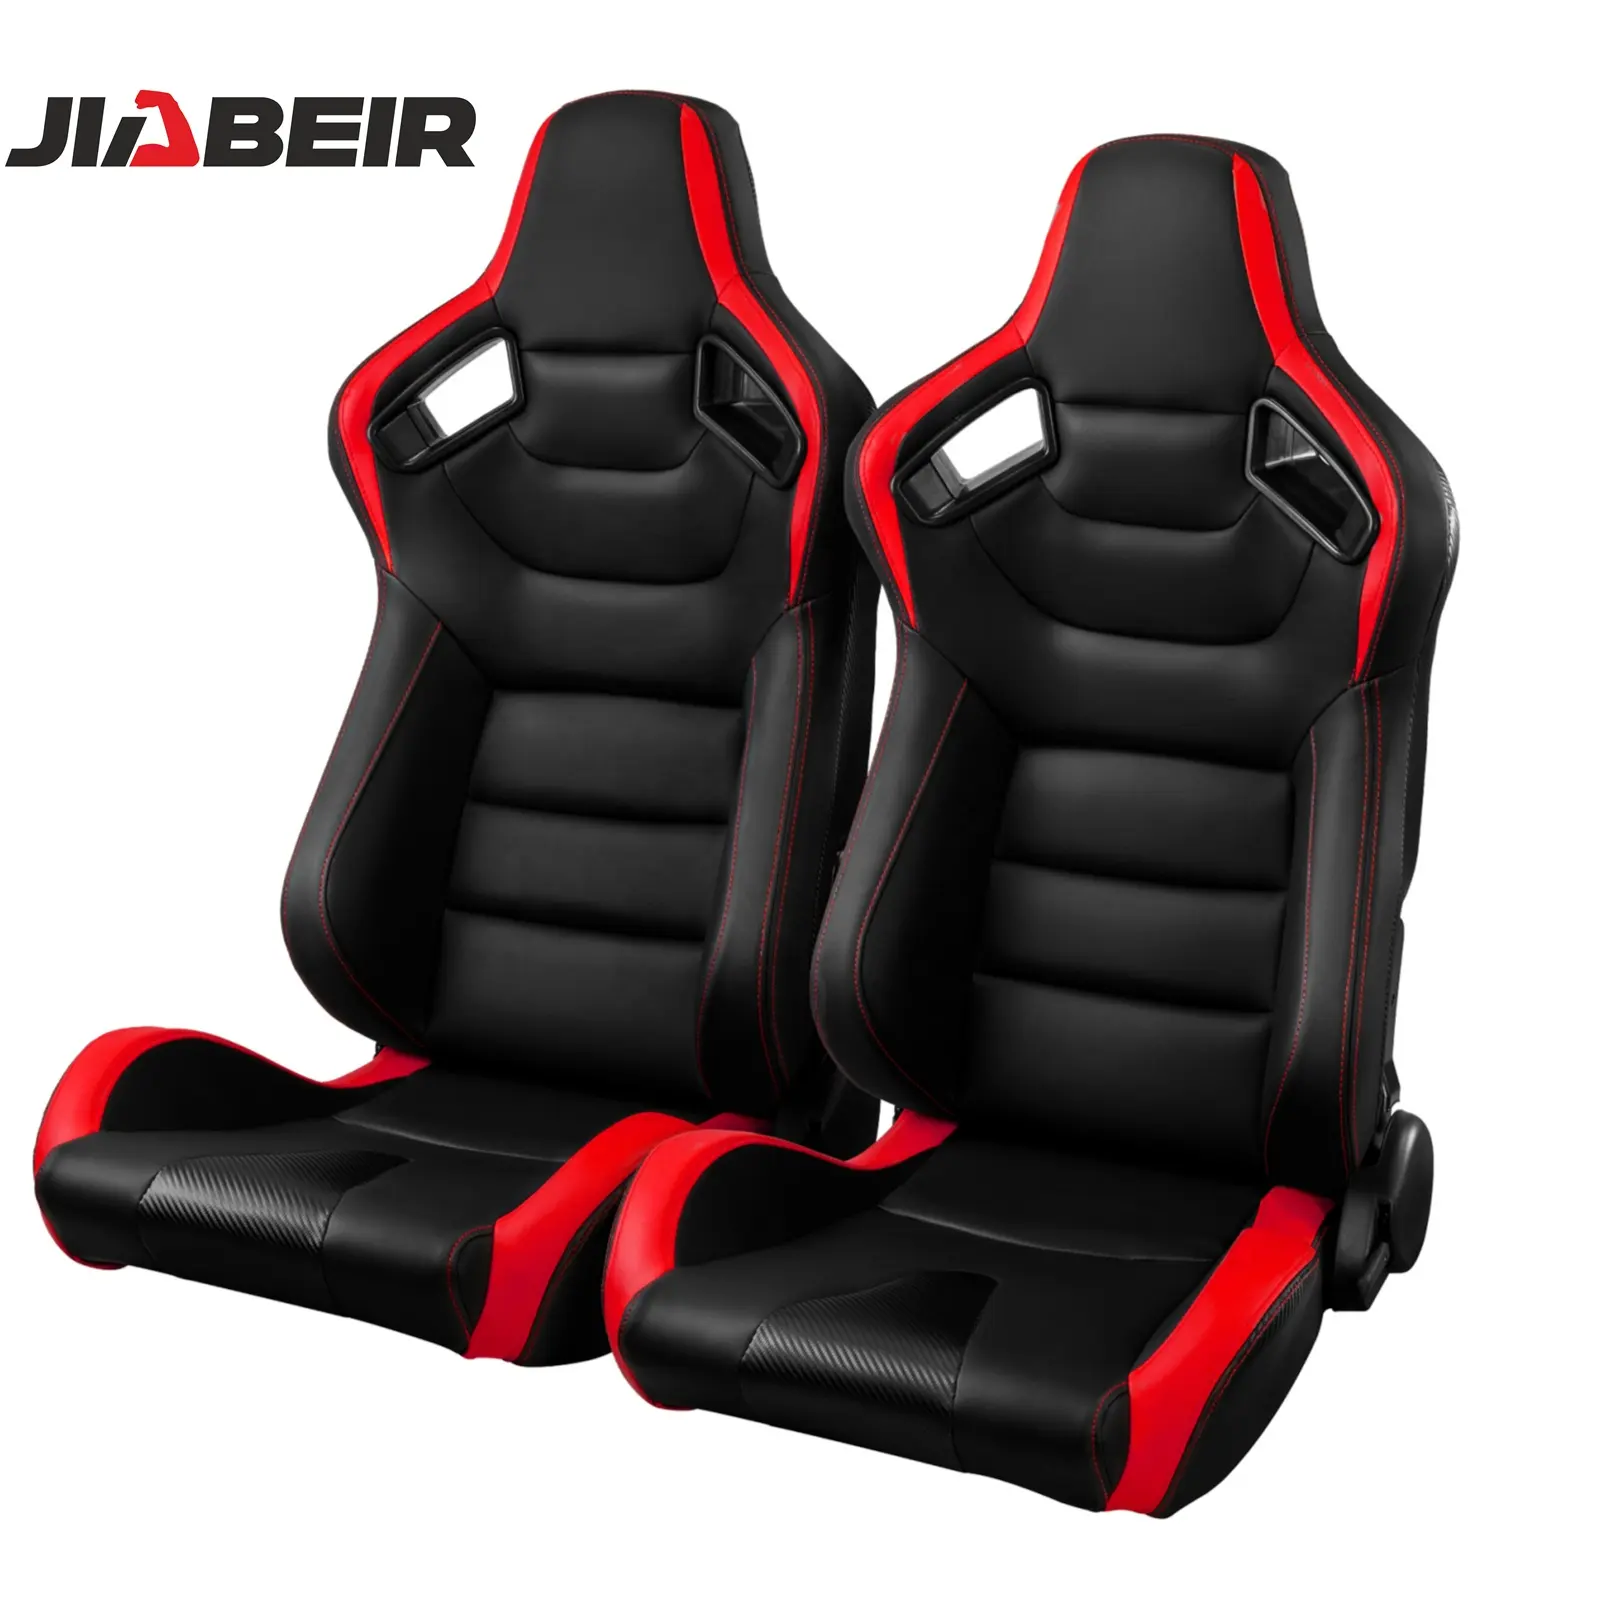 Jiabeir 1054 Series Universal Reclinable Black PVC Carbon Look Leather Bucket Racing Seats